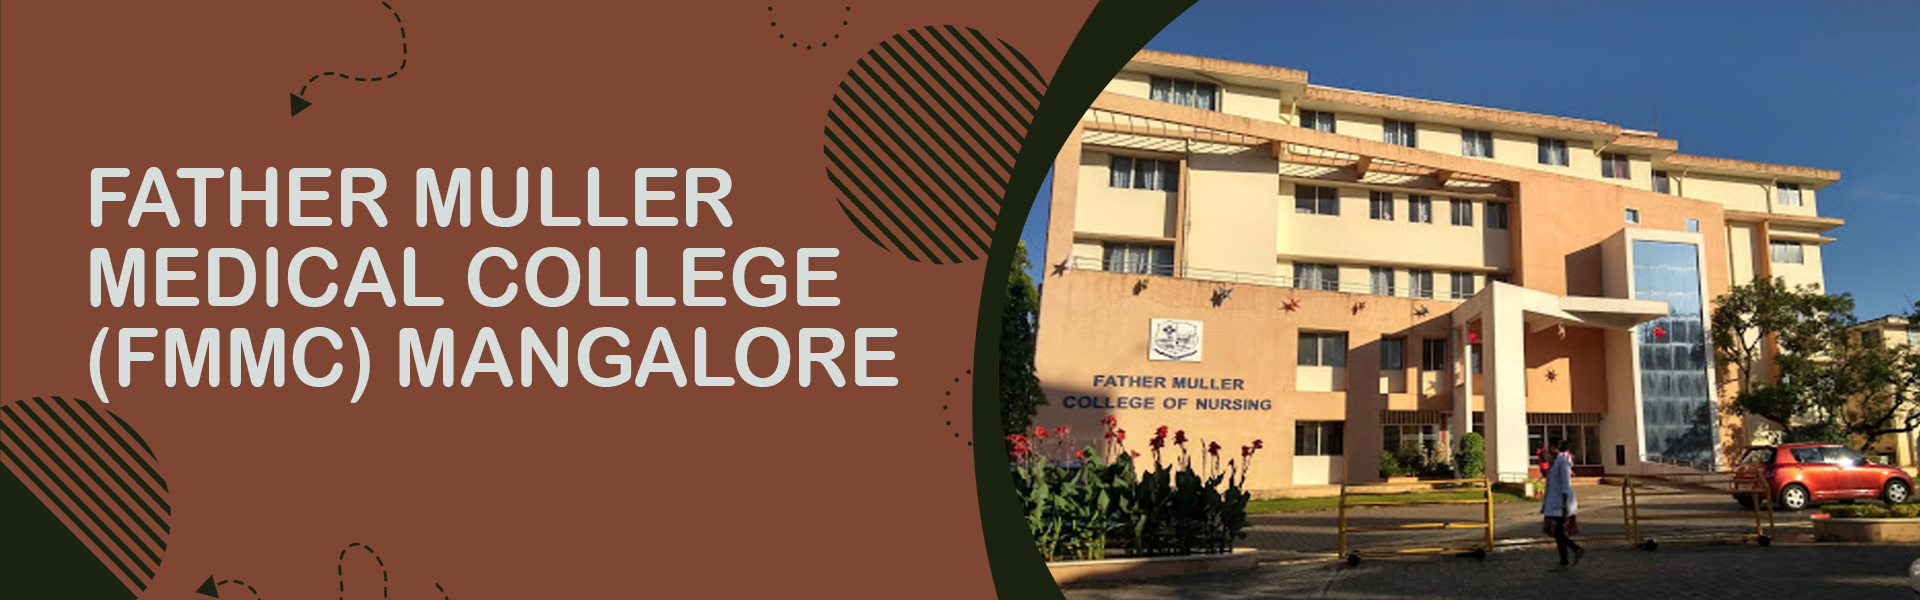 Father Muller Medical College  (FMMC) Mangalore